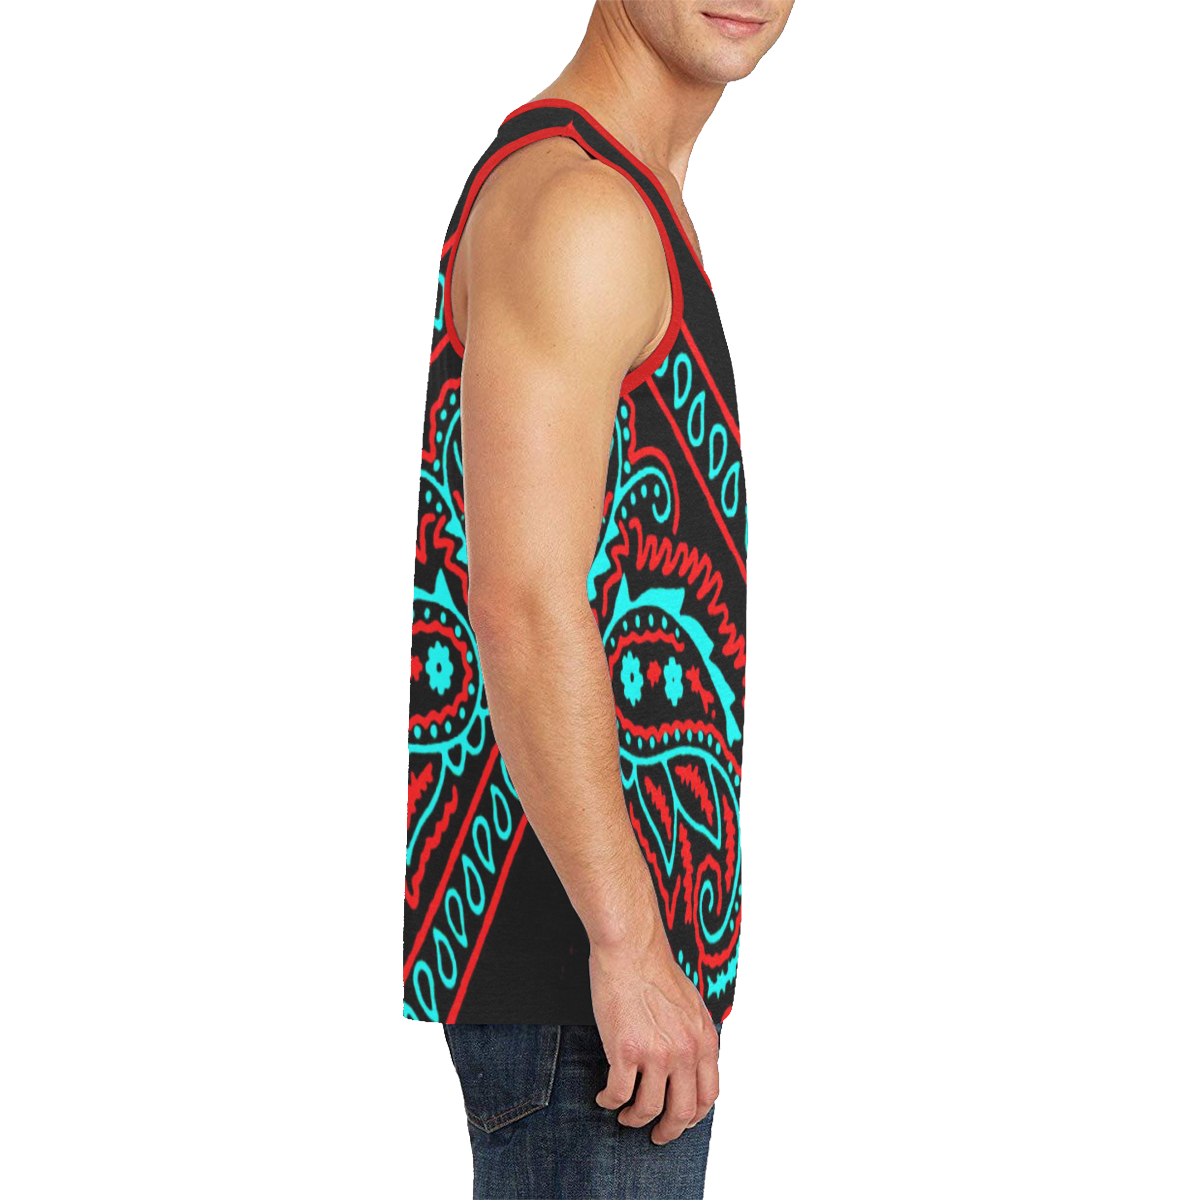 blue and red bandana Men's All Over Print Tank Top (Model T57)